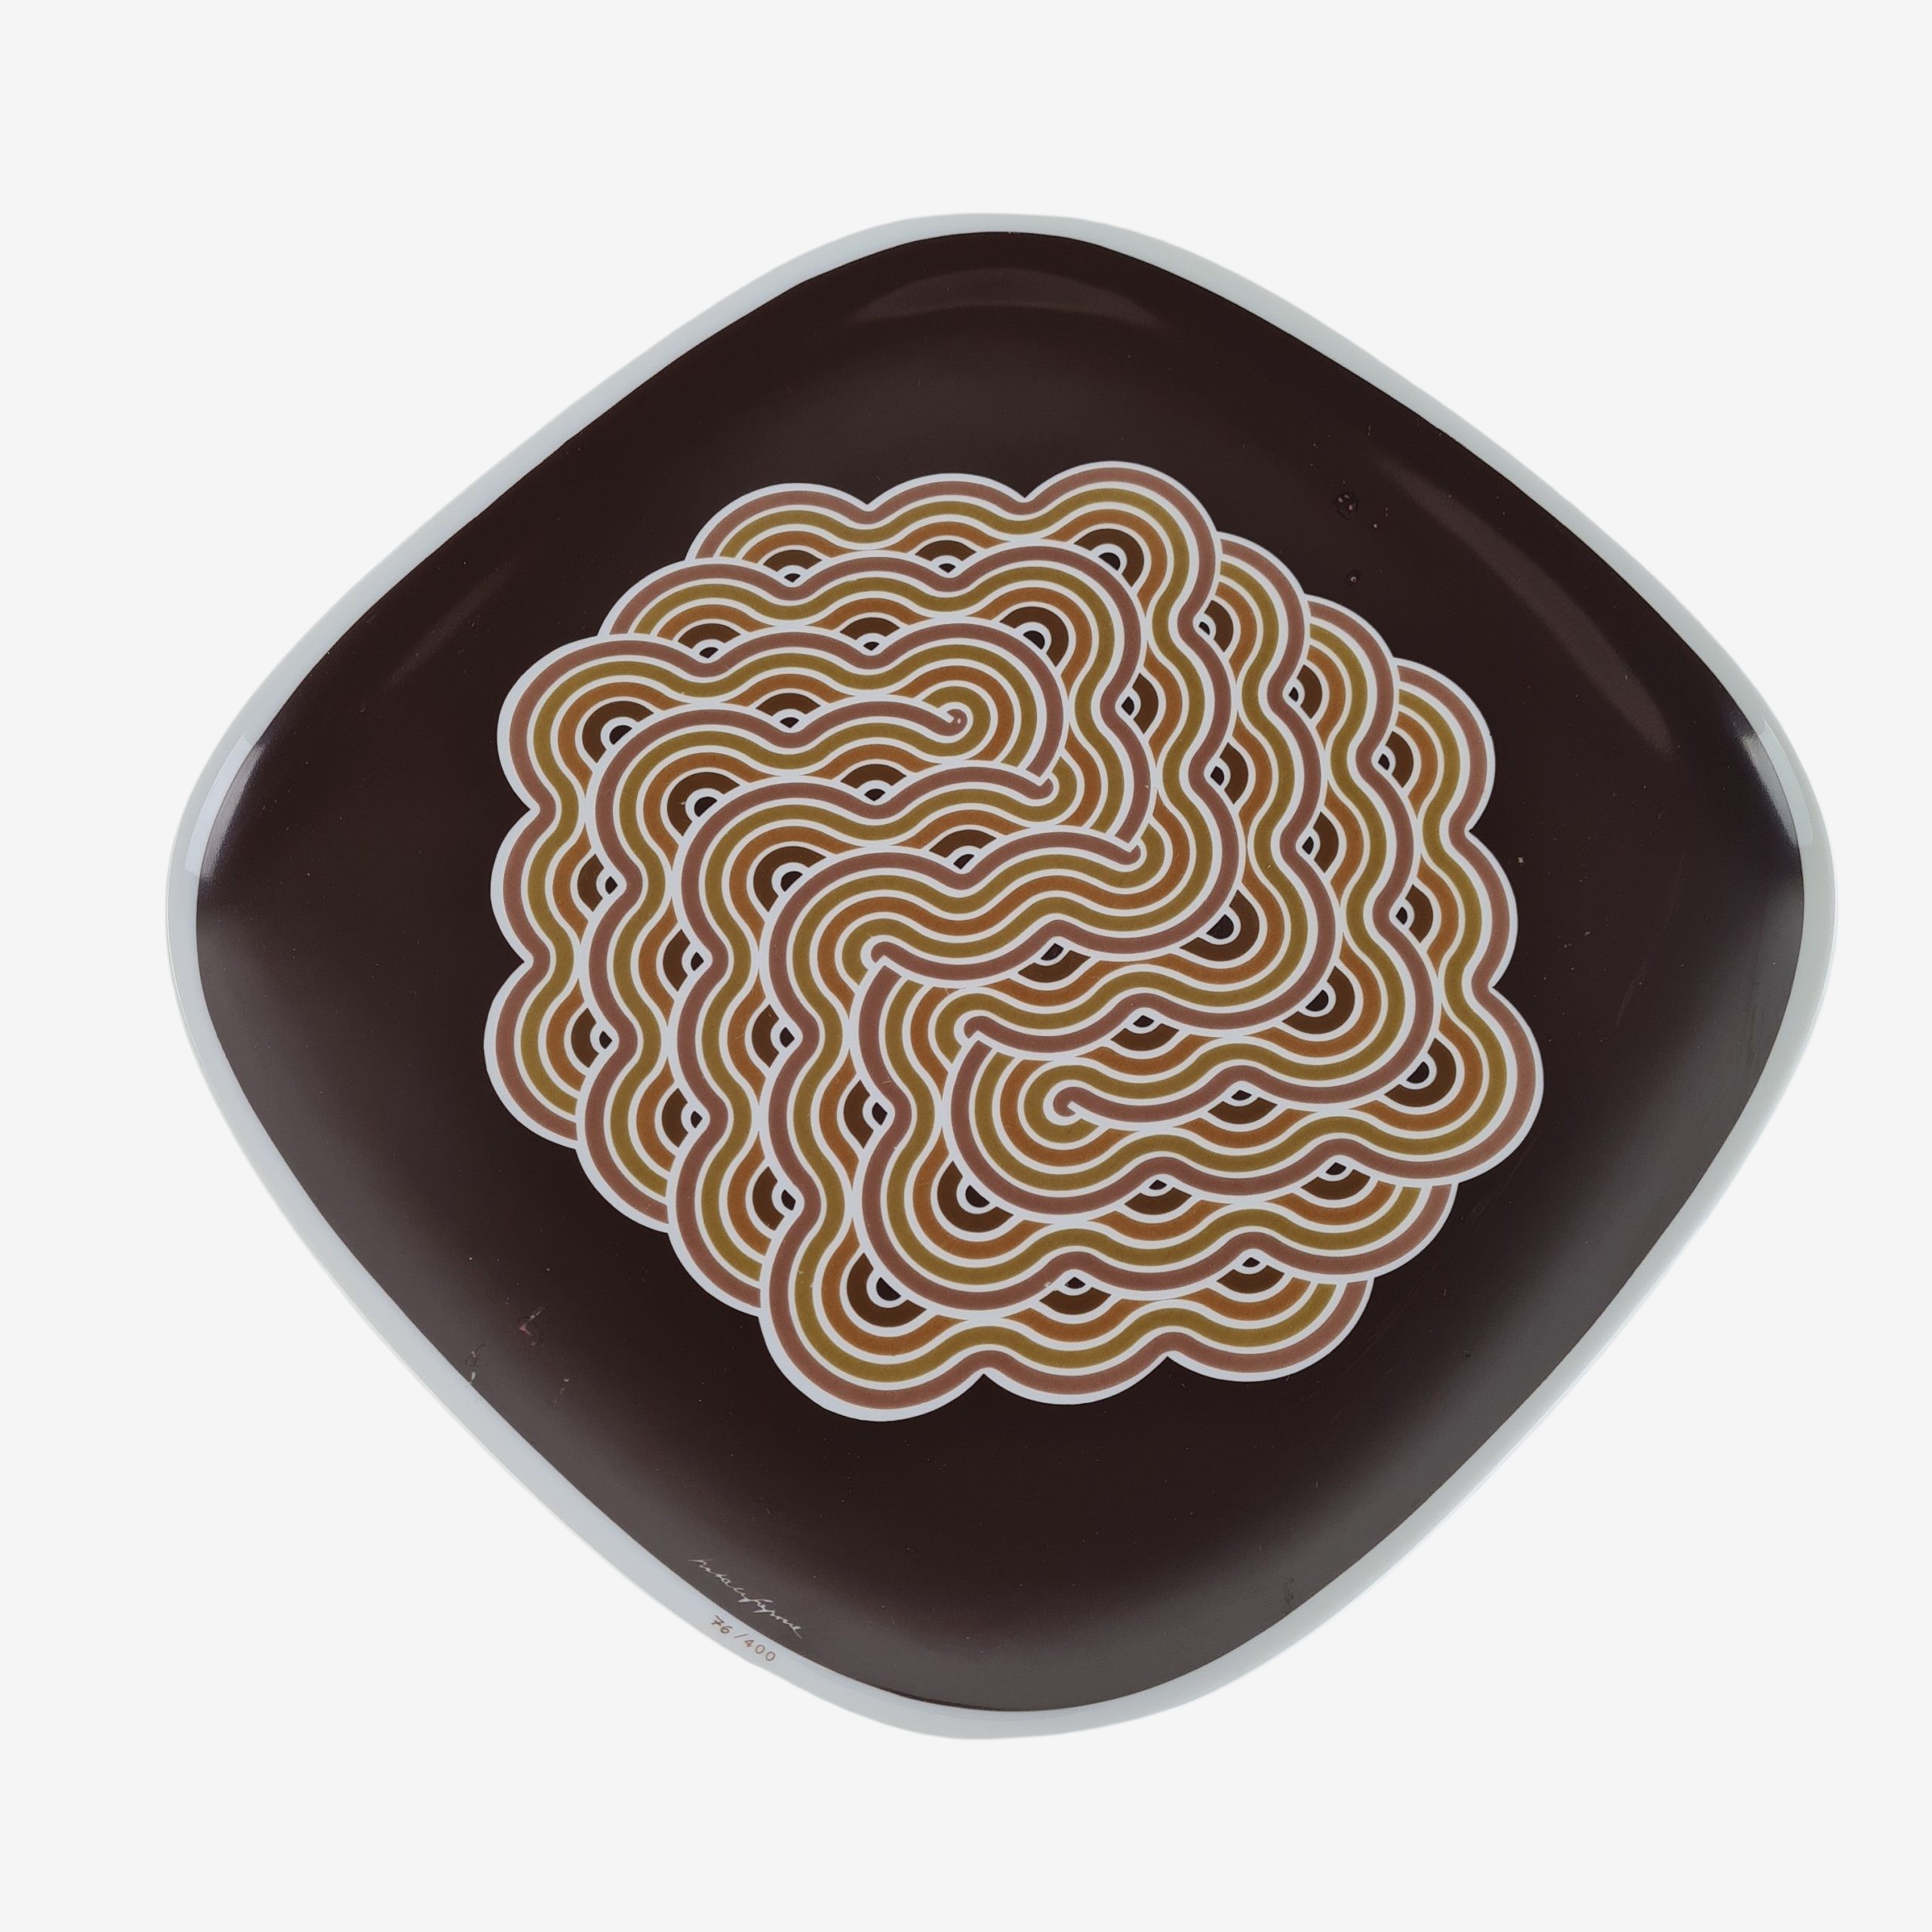 Dish/Wall decoration limited edition | Natale Sapone | Rosenthal, Germany